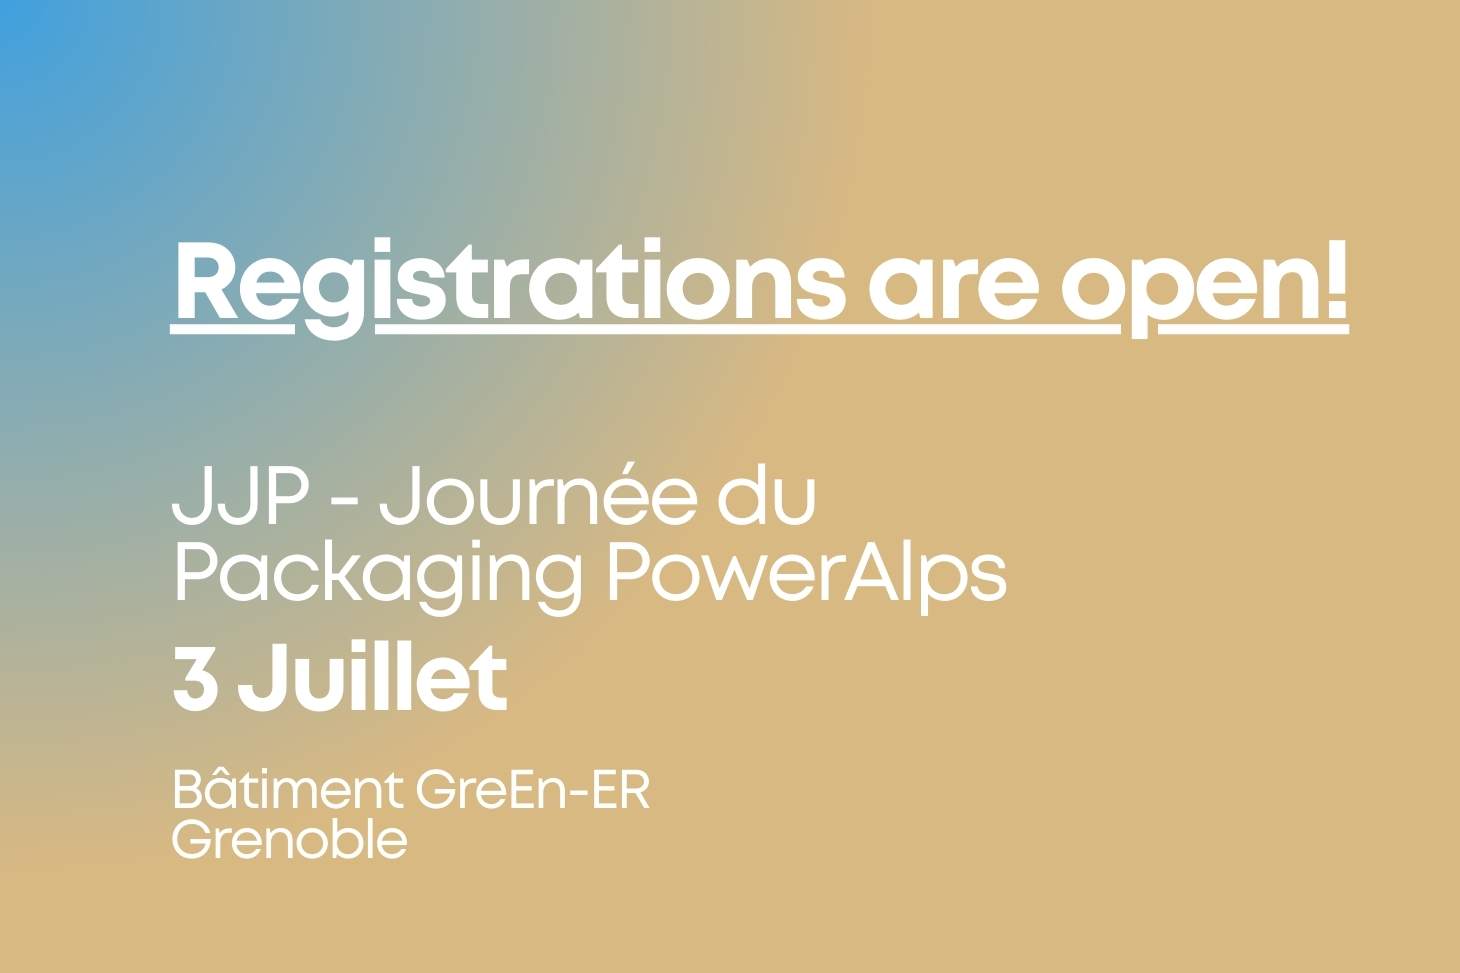 Registrations are open for JPP - Journée Packaging PowerAlps